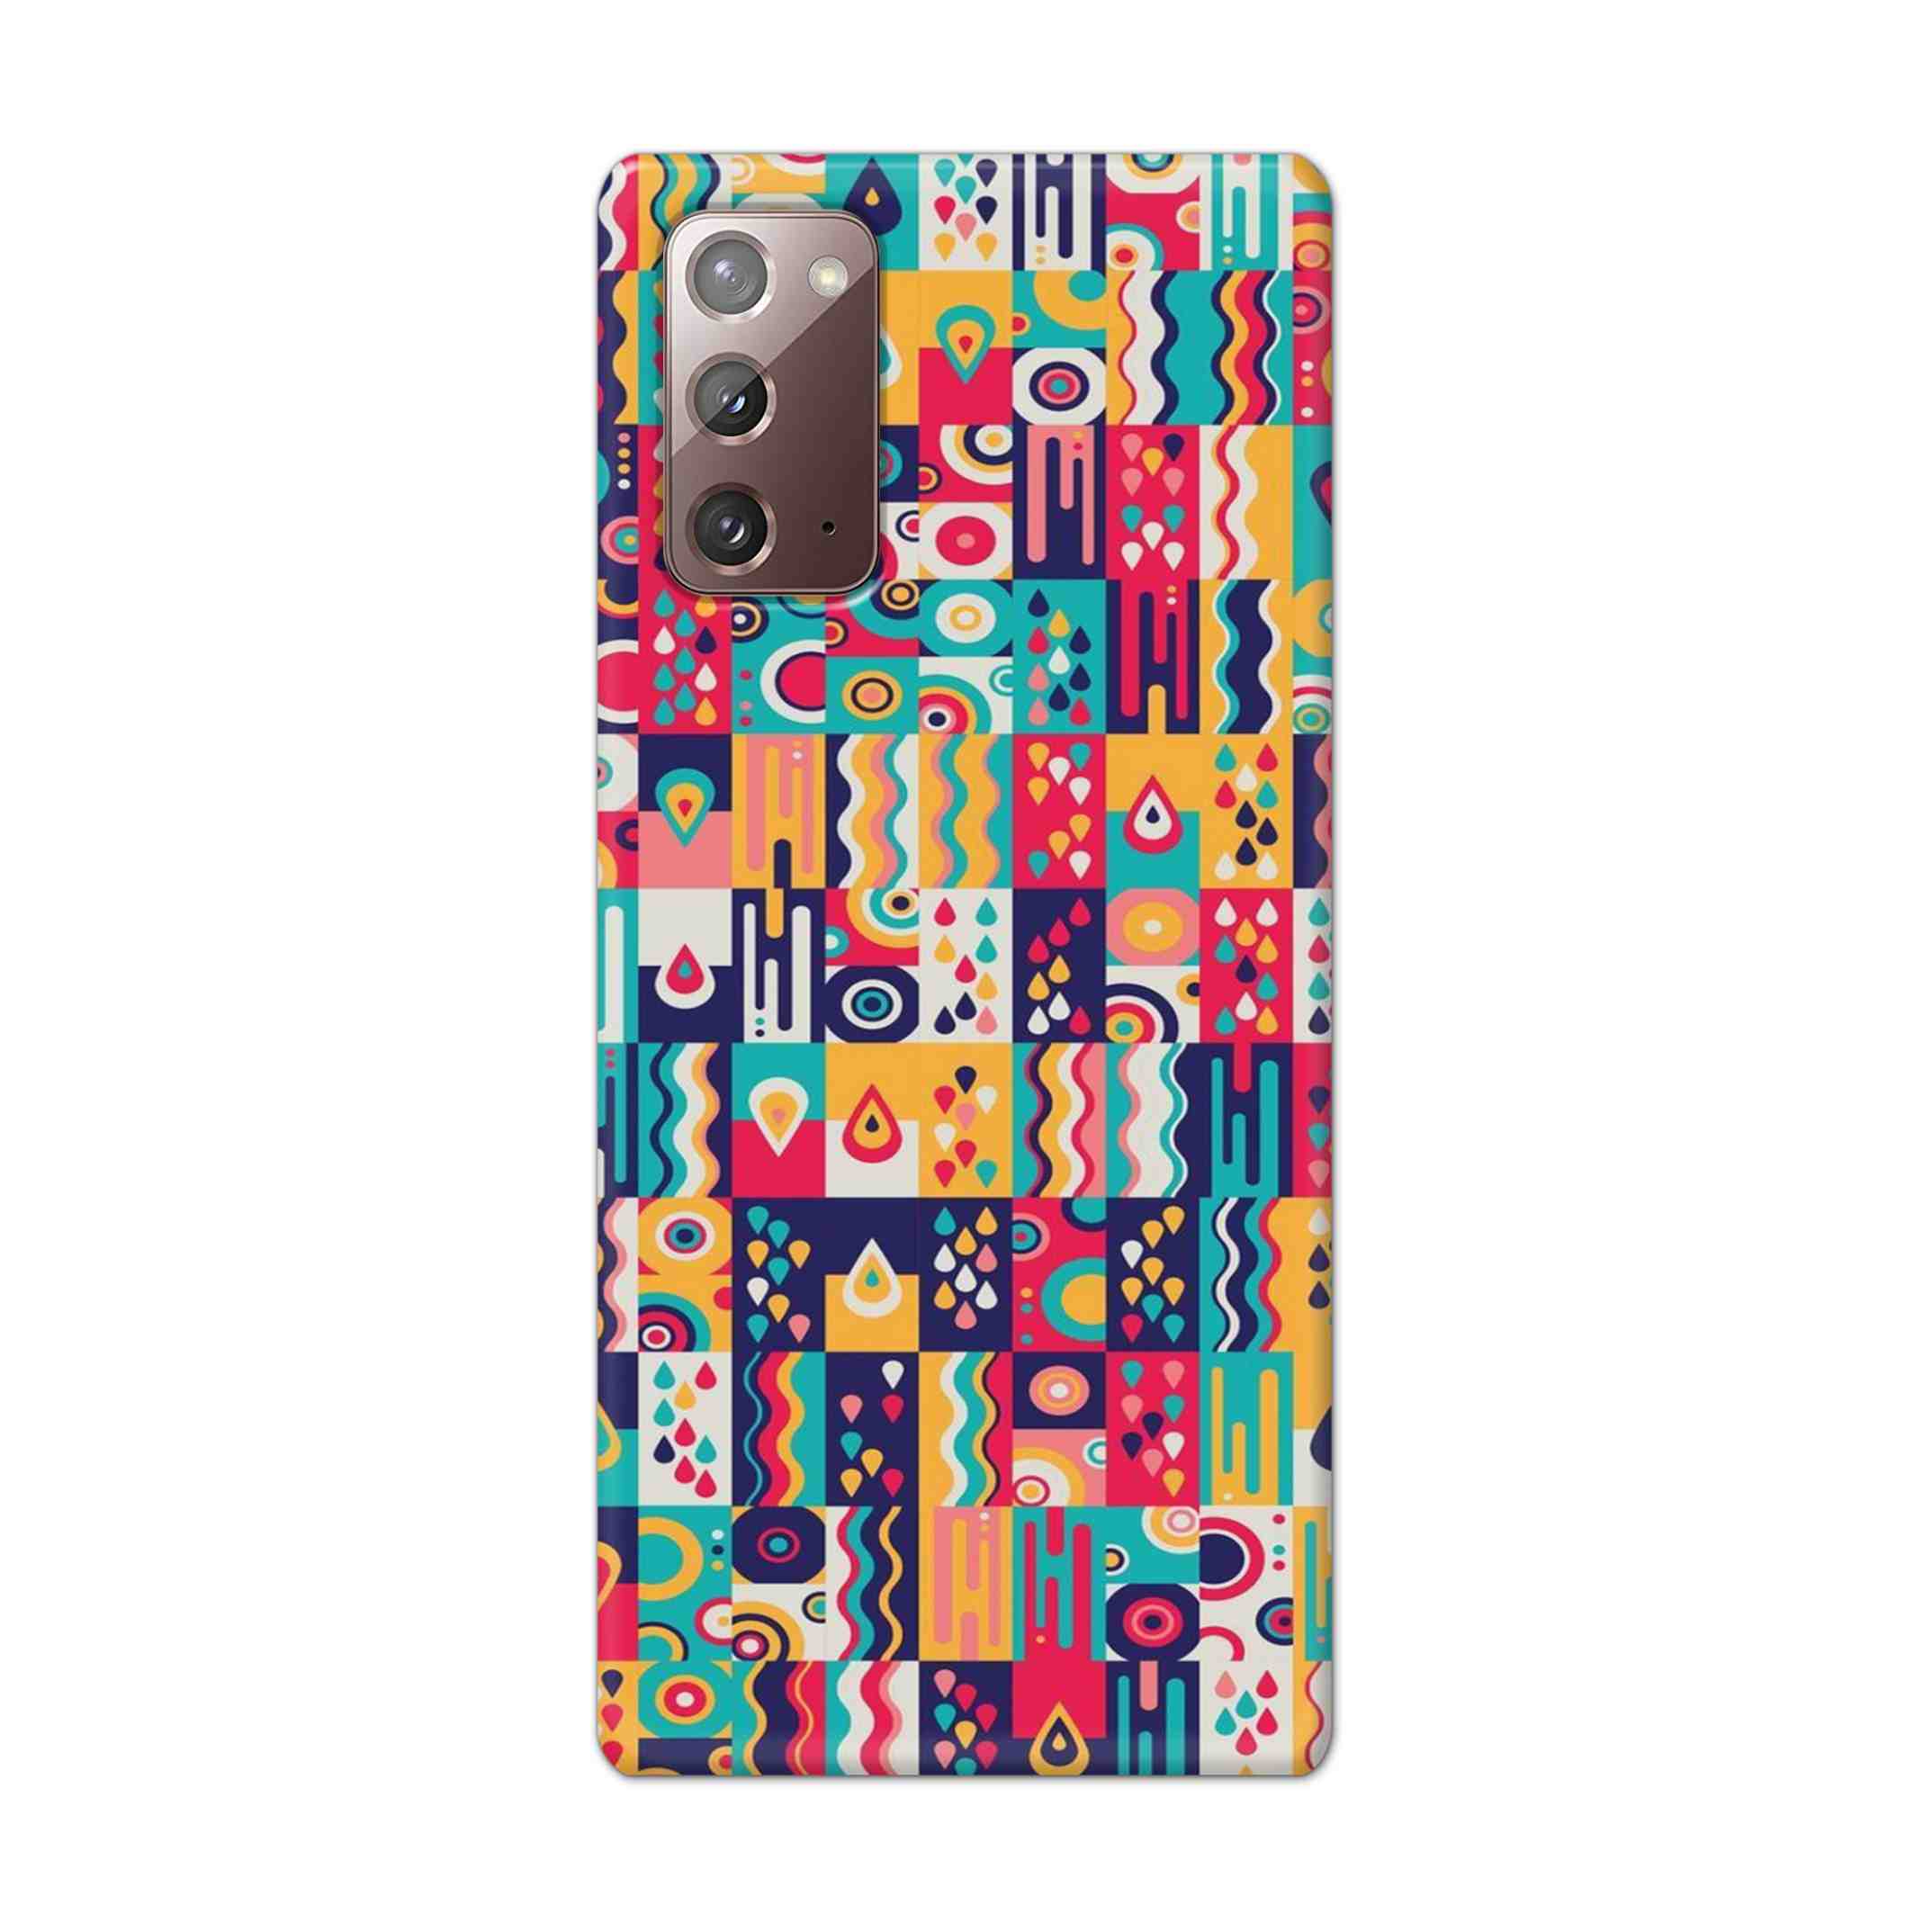 Buy Art Hard Back Mobile Phone Case Cover For Samsung Galaxy Note 20 Online